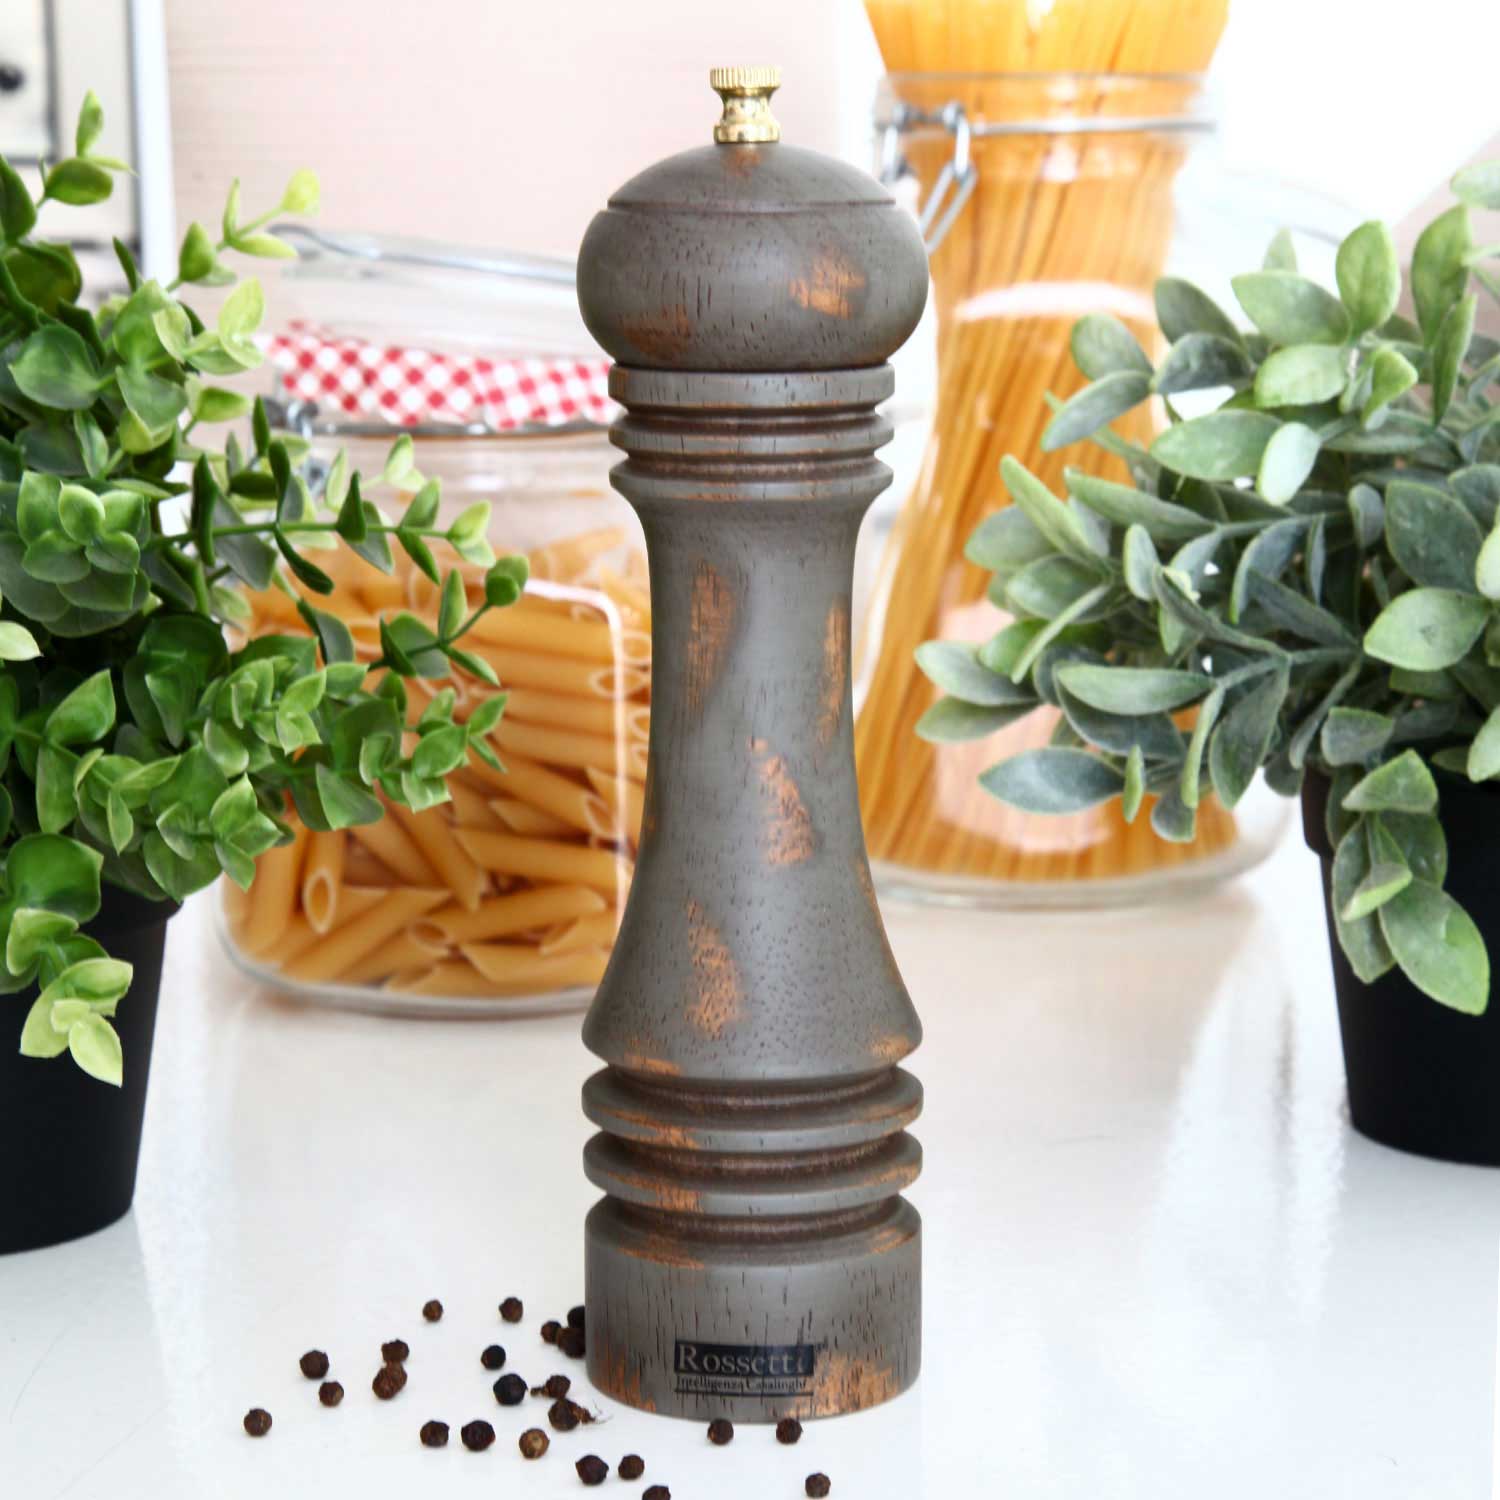 Rossetti Roma 1956 Wood Pepper Grinder Large